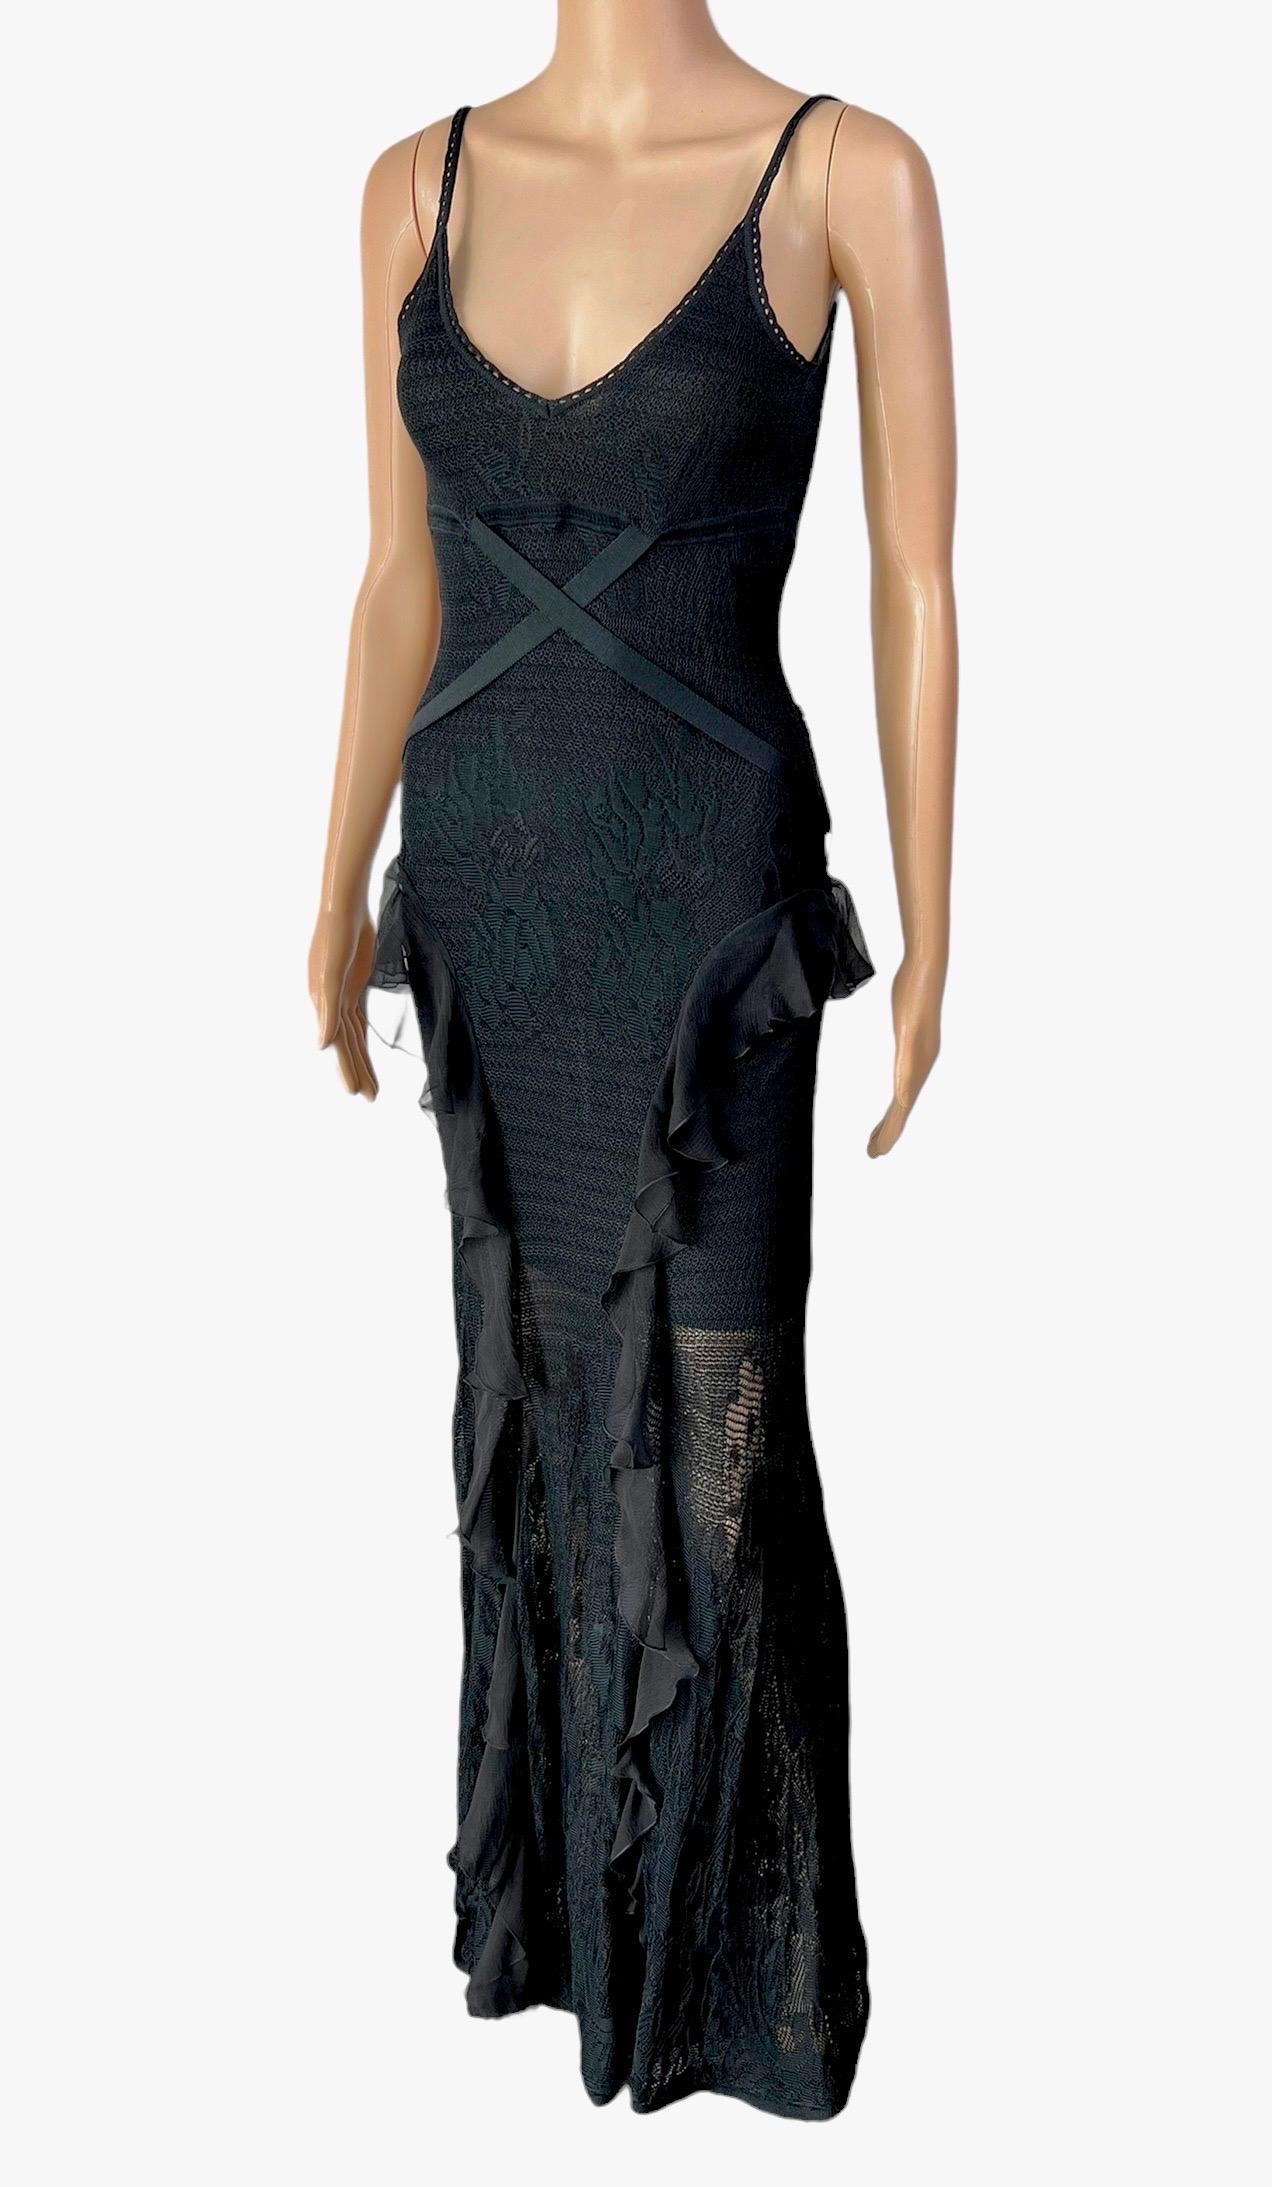 Christian Dior by John Galliano Ruffled Belted Sheer Lace Open Knit Black Evening Dress Gown XS/S

Please note size tag has been removed.

